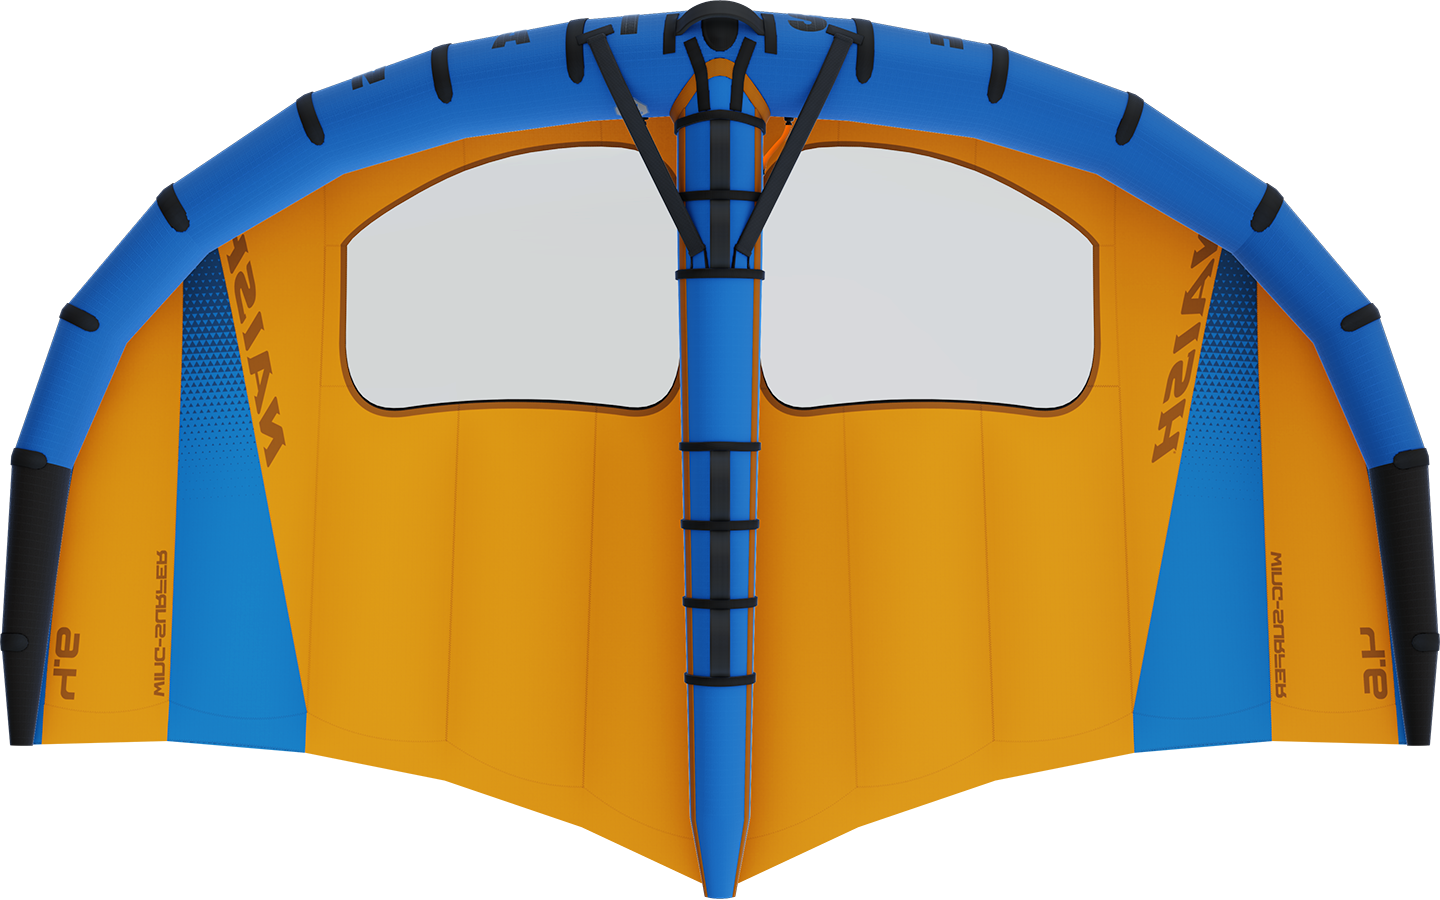 Naish S26 Wing Surfer - Sizes and Color Vary